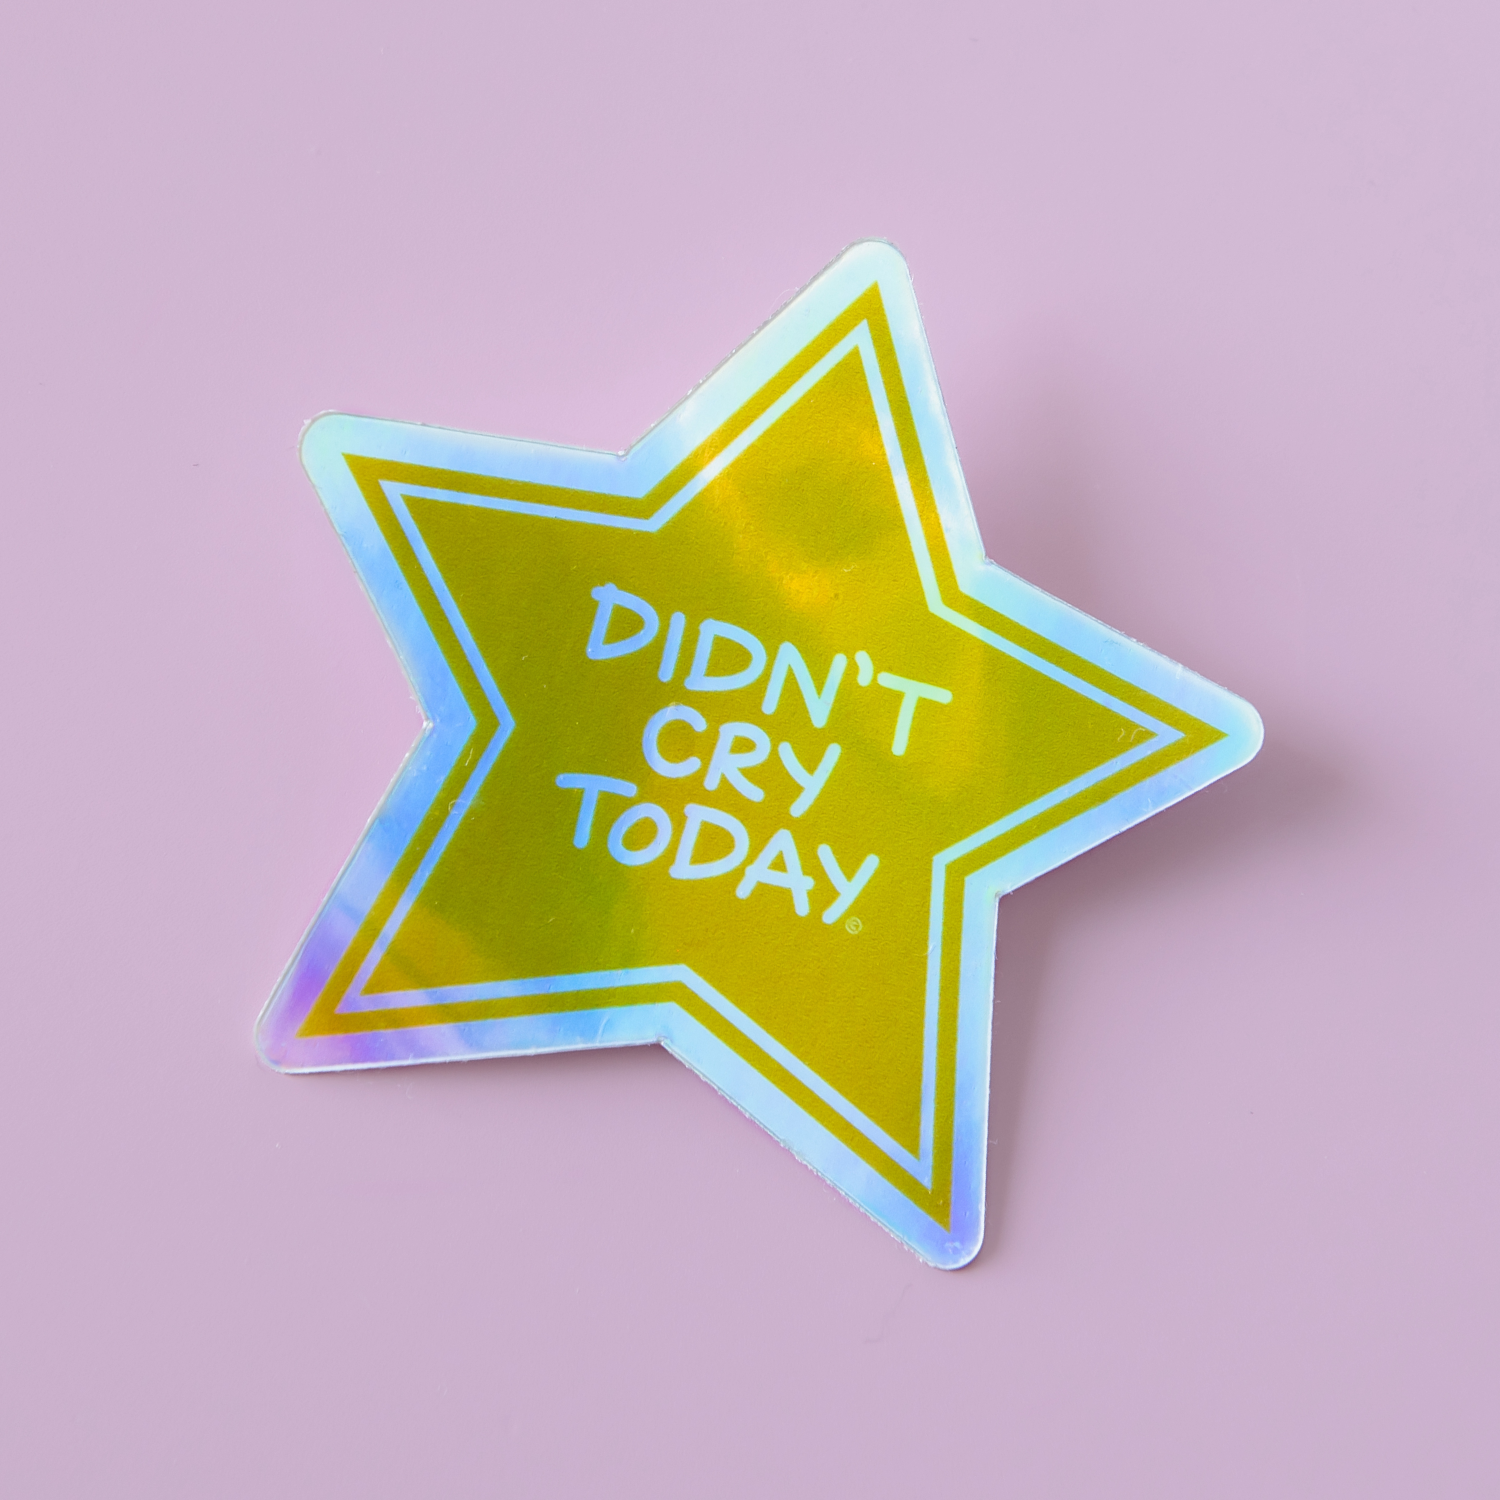 Didn't Cry Today Holographic Vinyl Sticker